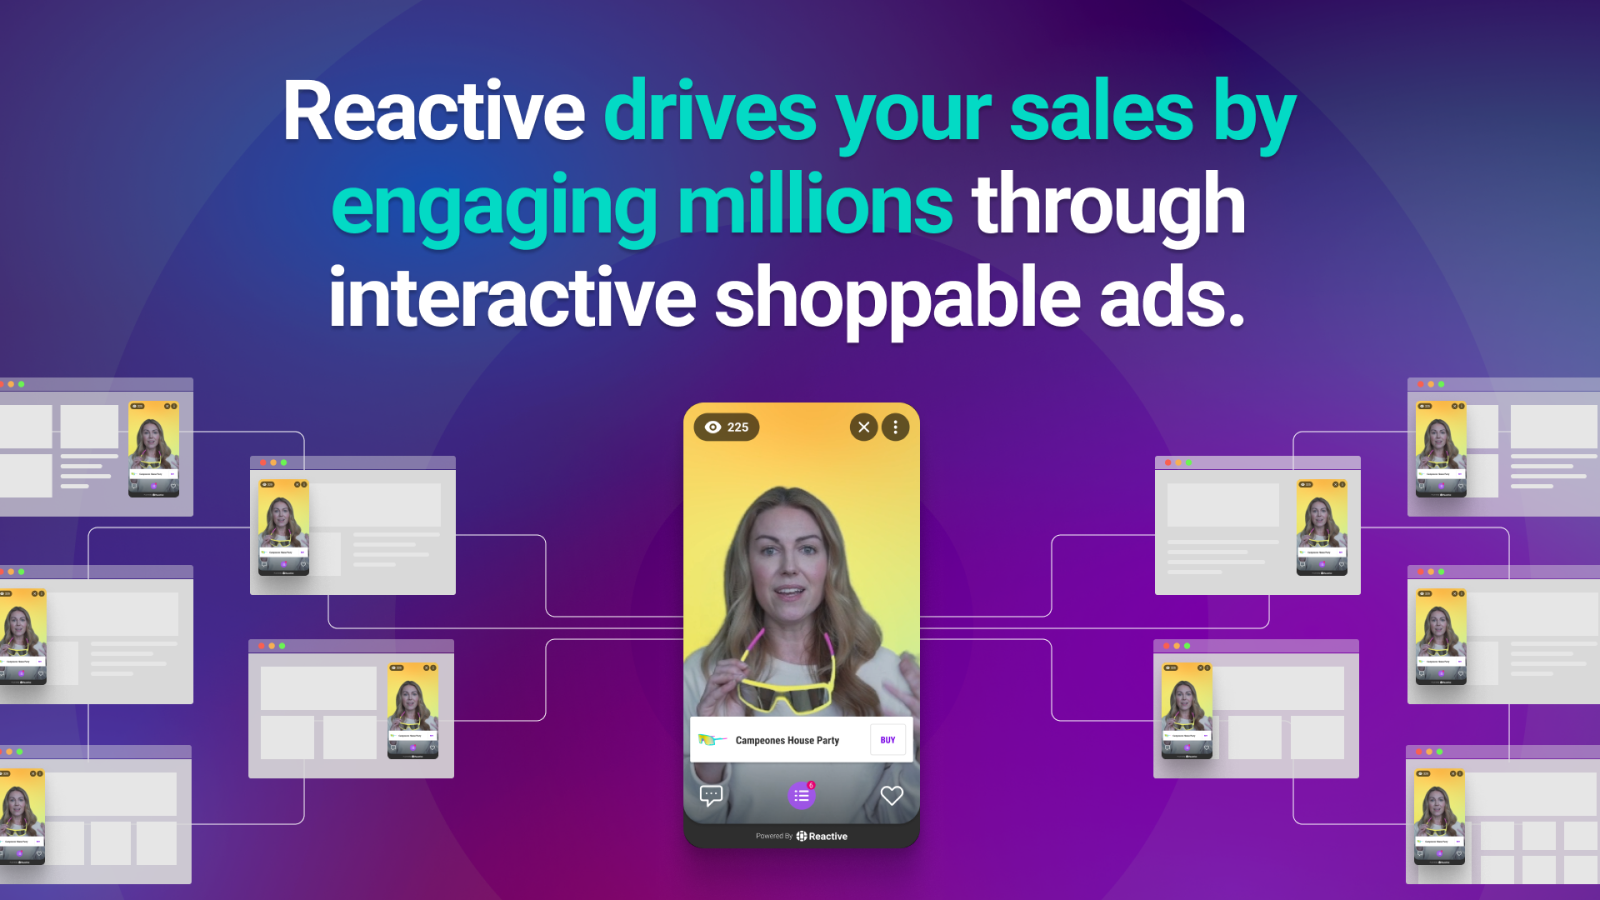 Reactive drives sales with interactive shoppable ads